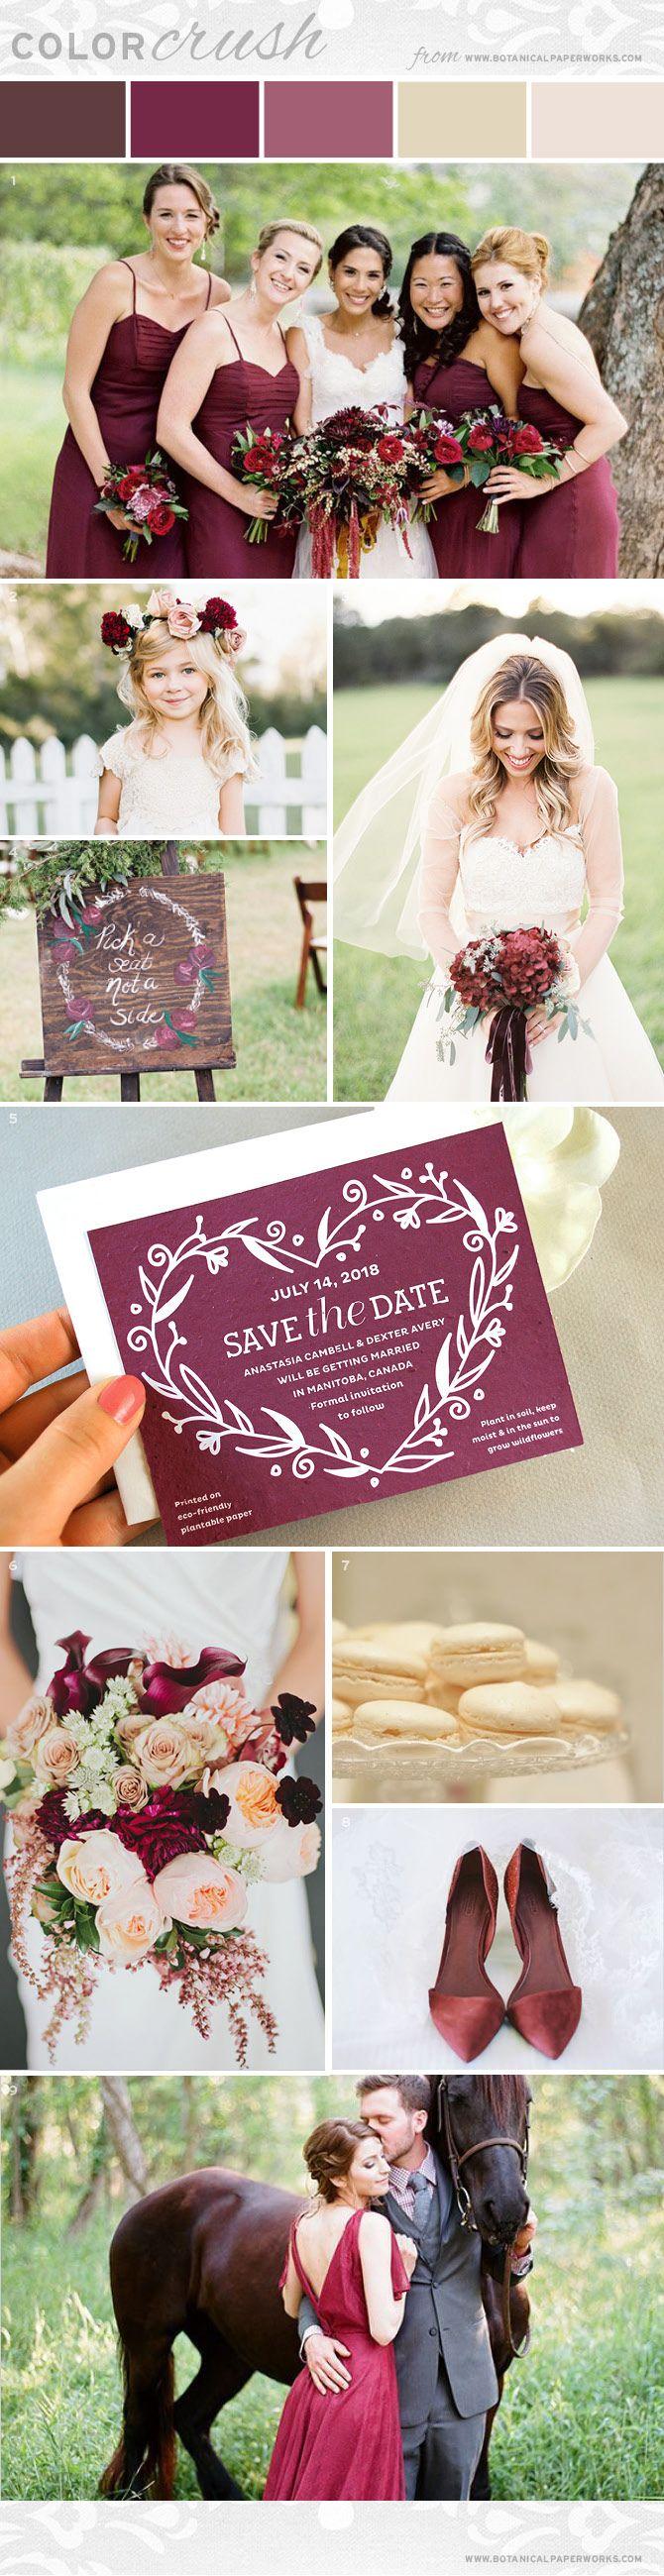 Wedding - {inspiration Board} Color Crush - Burgundy, Woodsy Browns   Neutral Creams